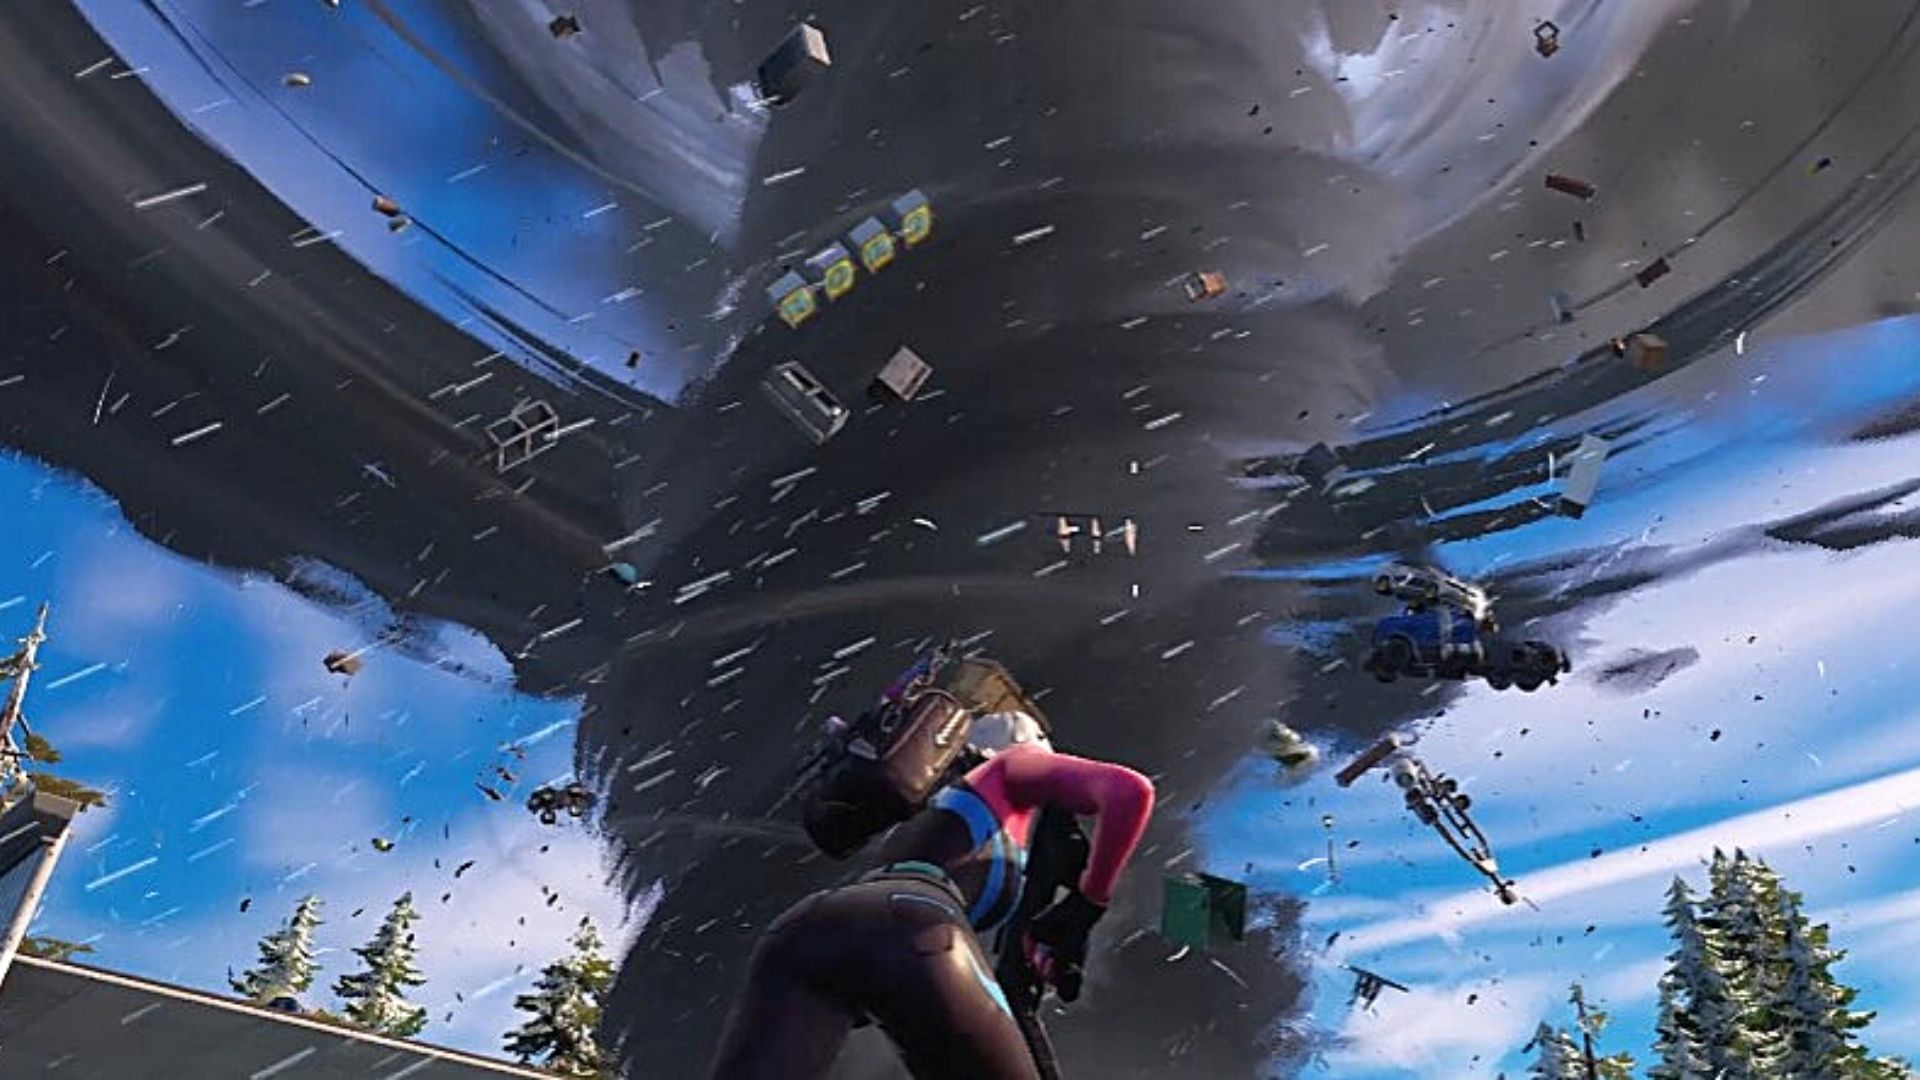 FORTNITE TORNADOES AND LIGHTNING APPEARING IN GAME